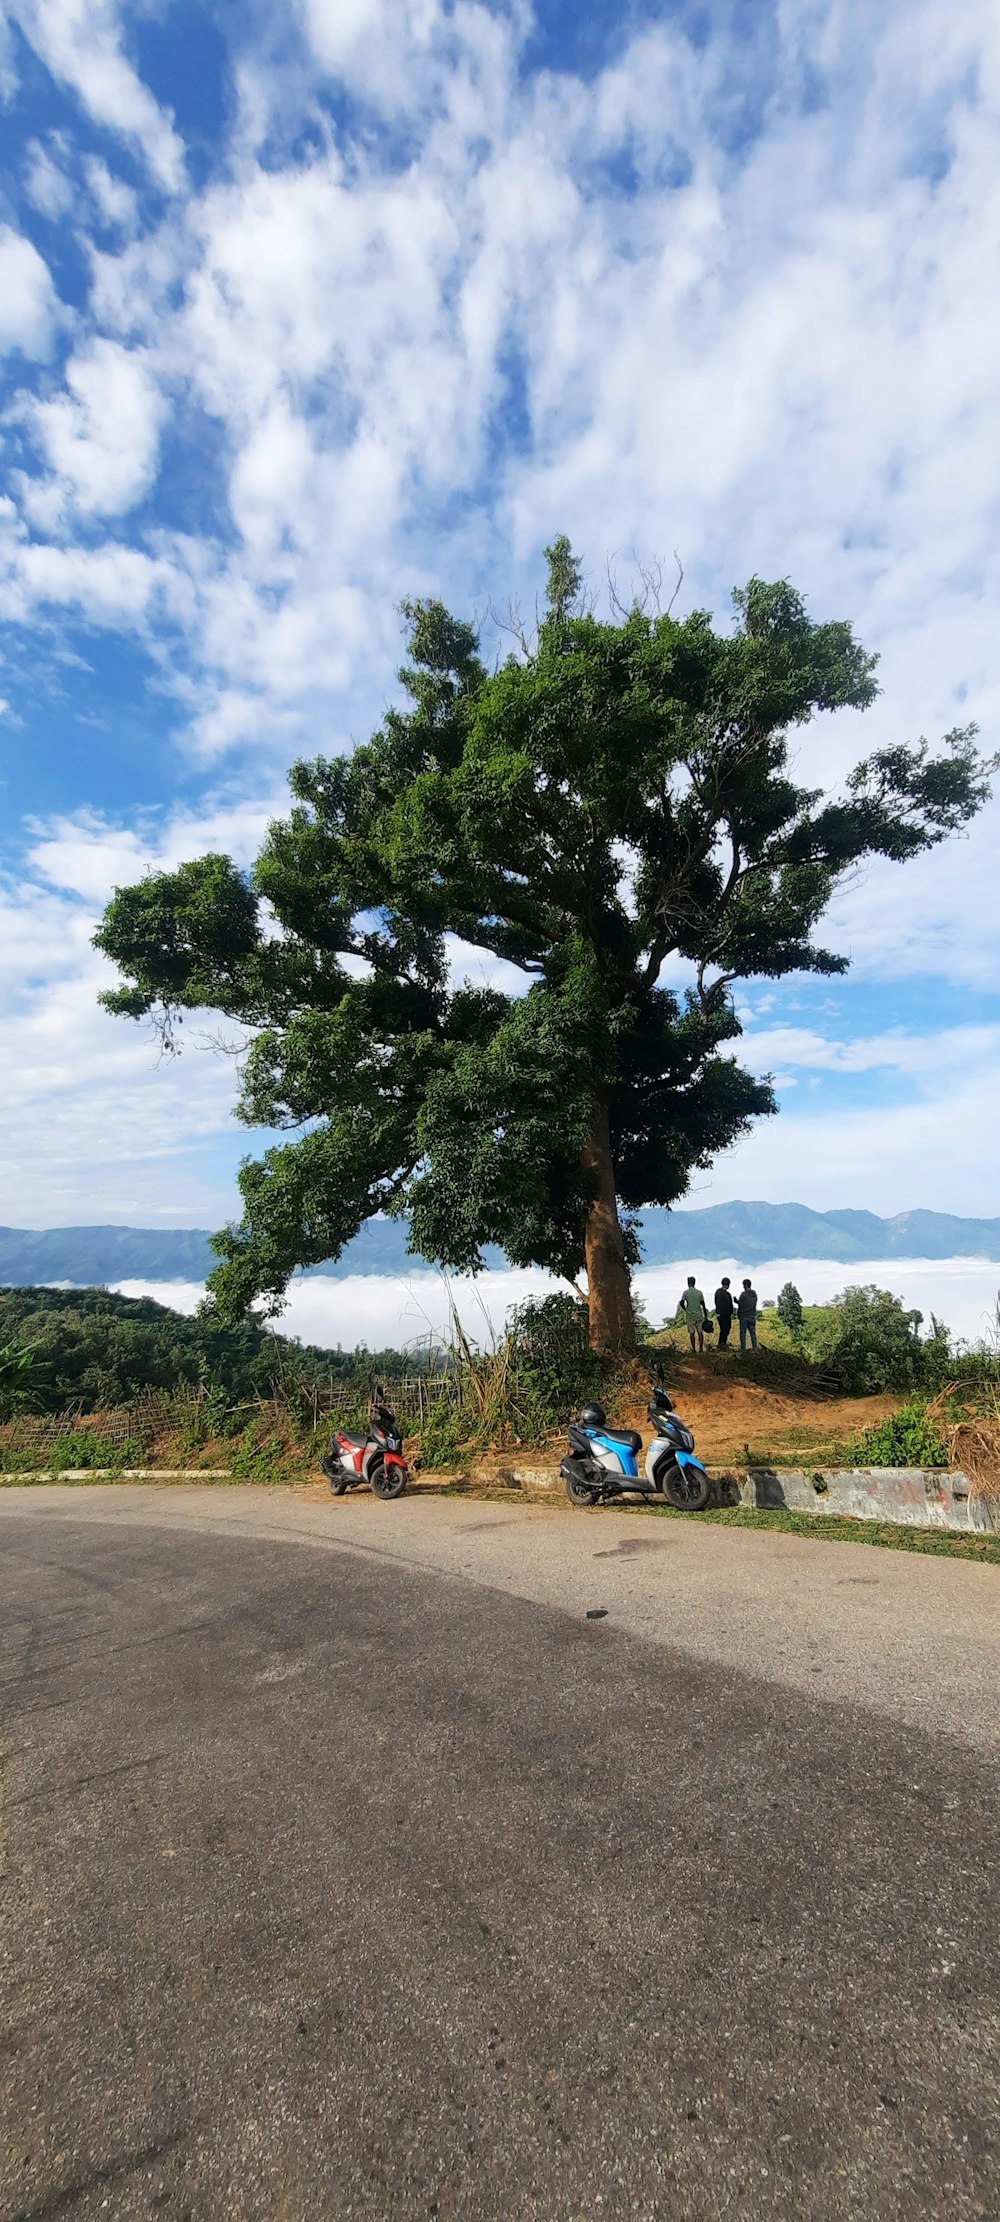 a large tree sitting on the side of a road